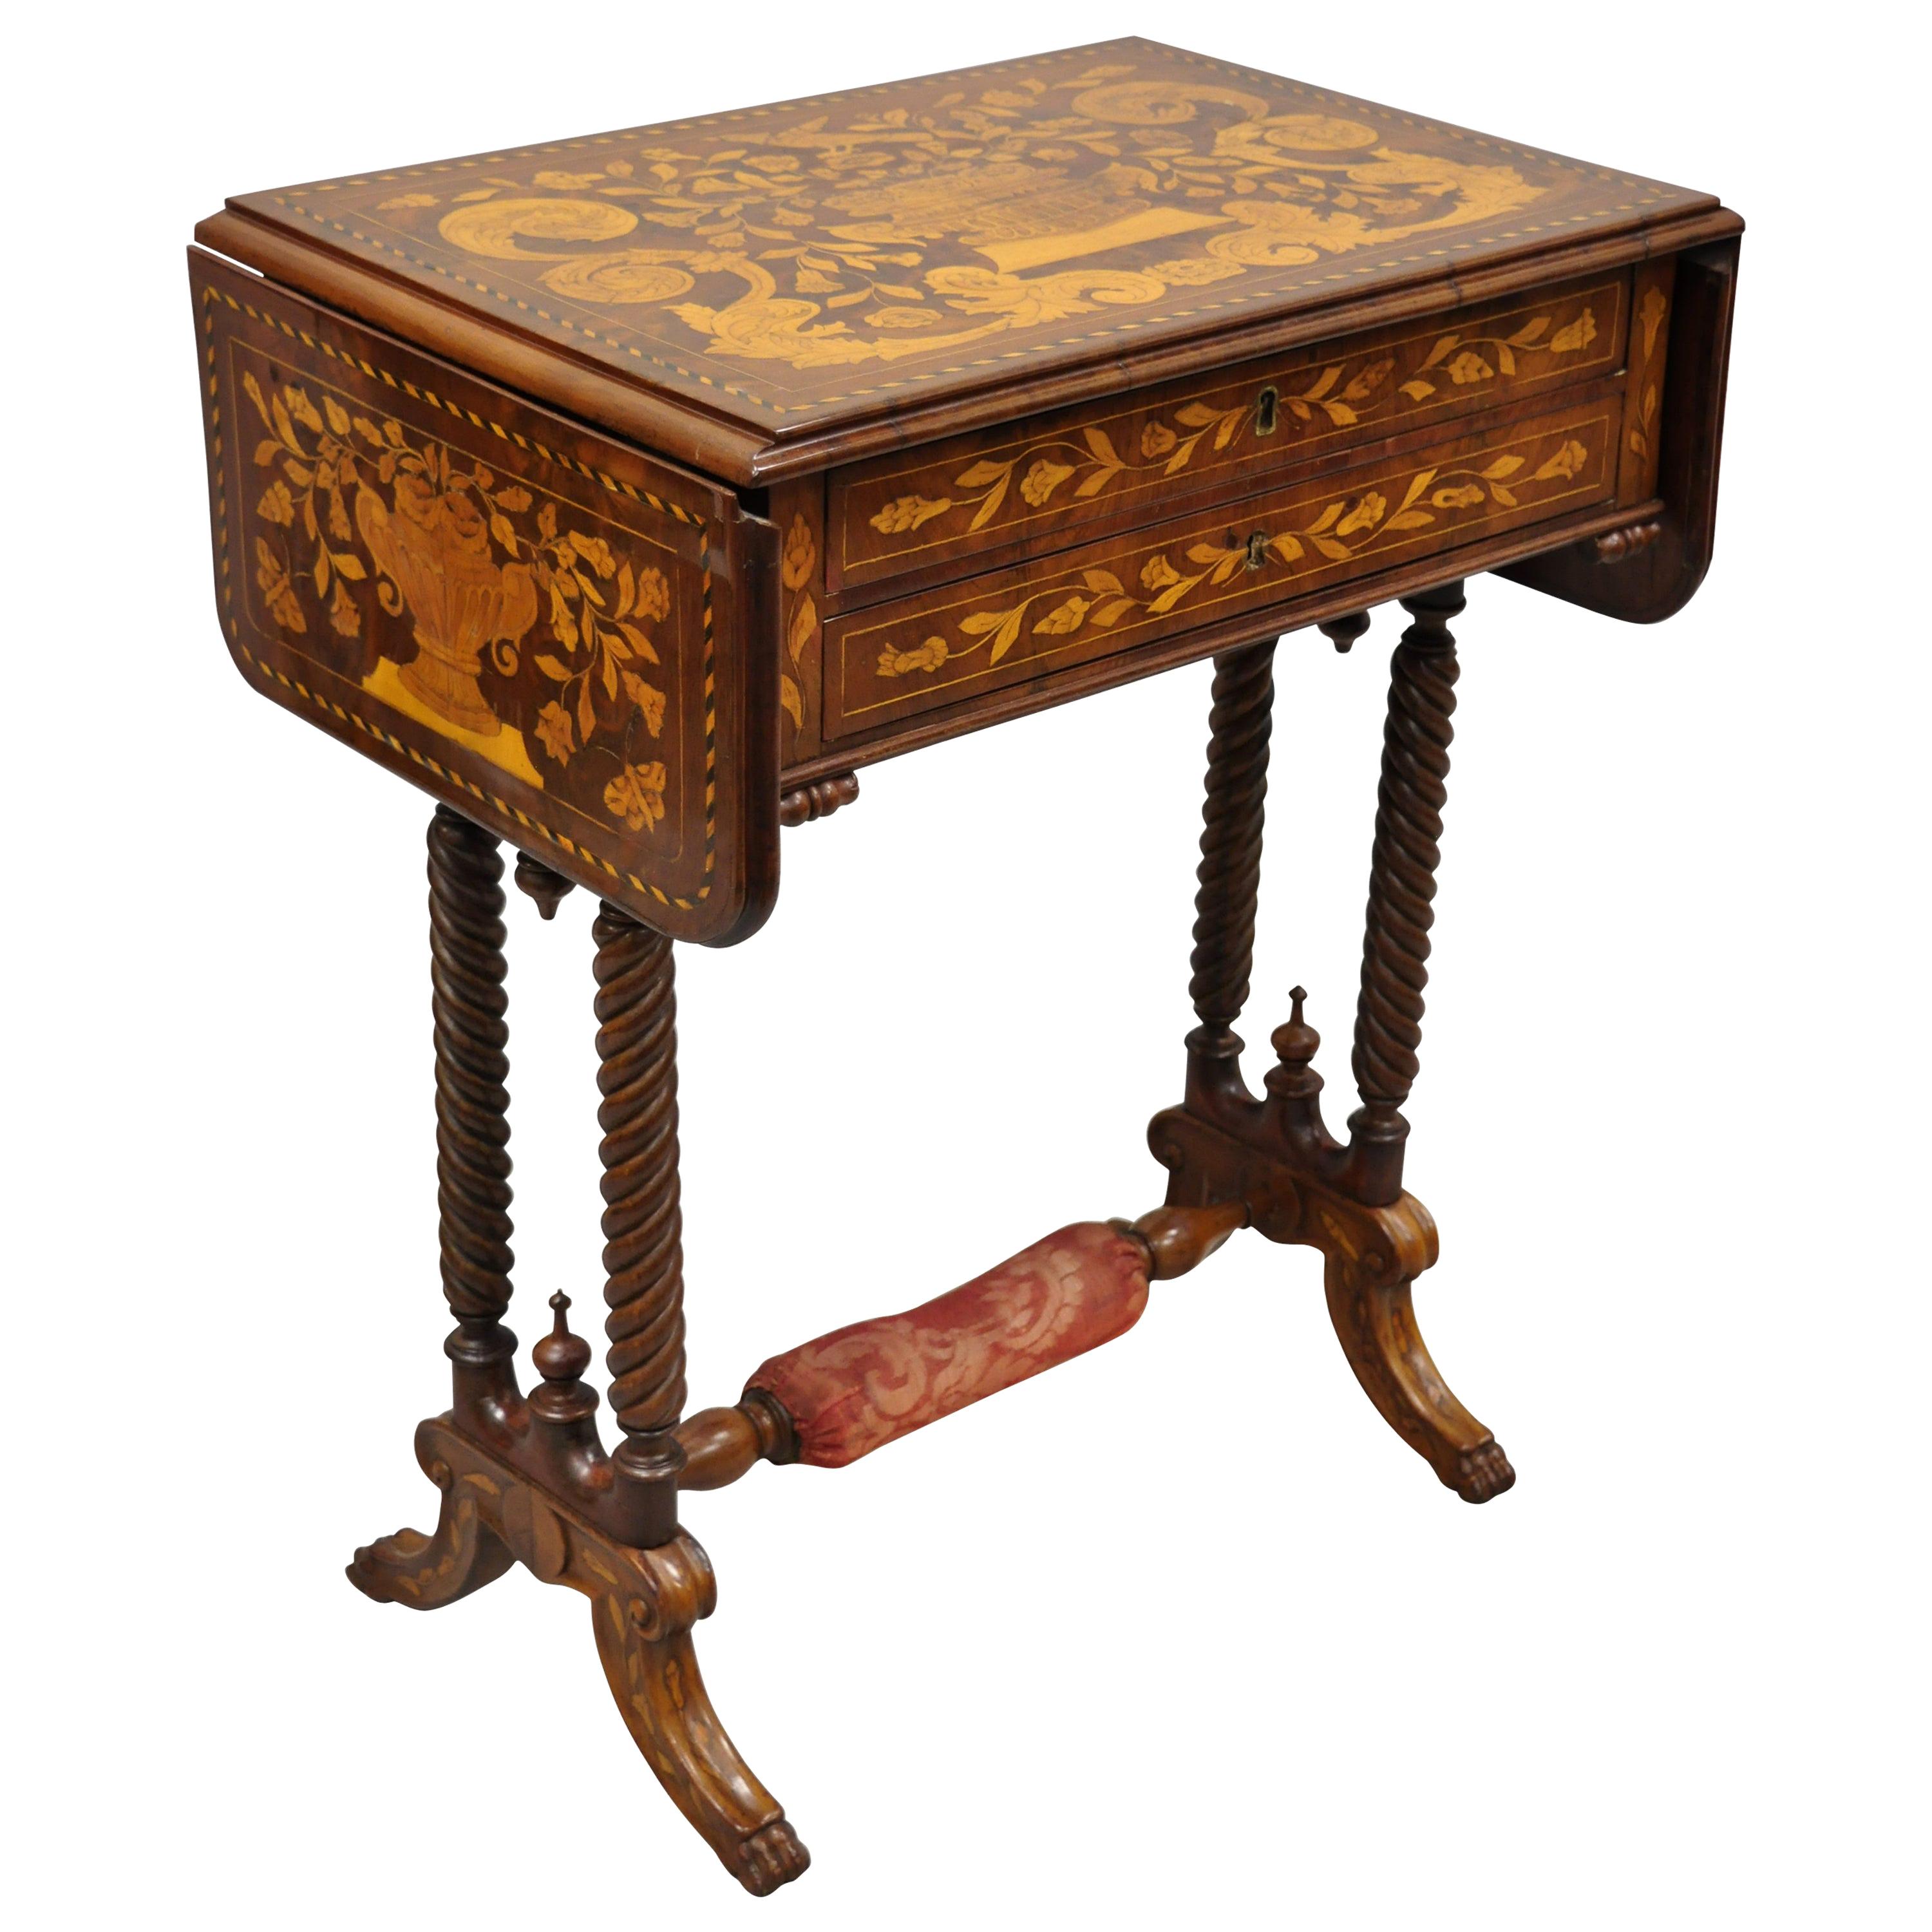 Dutch Marquetry Inlaid Regency Style Drop-Leaf Sewing Stand Work Table